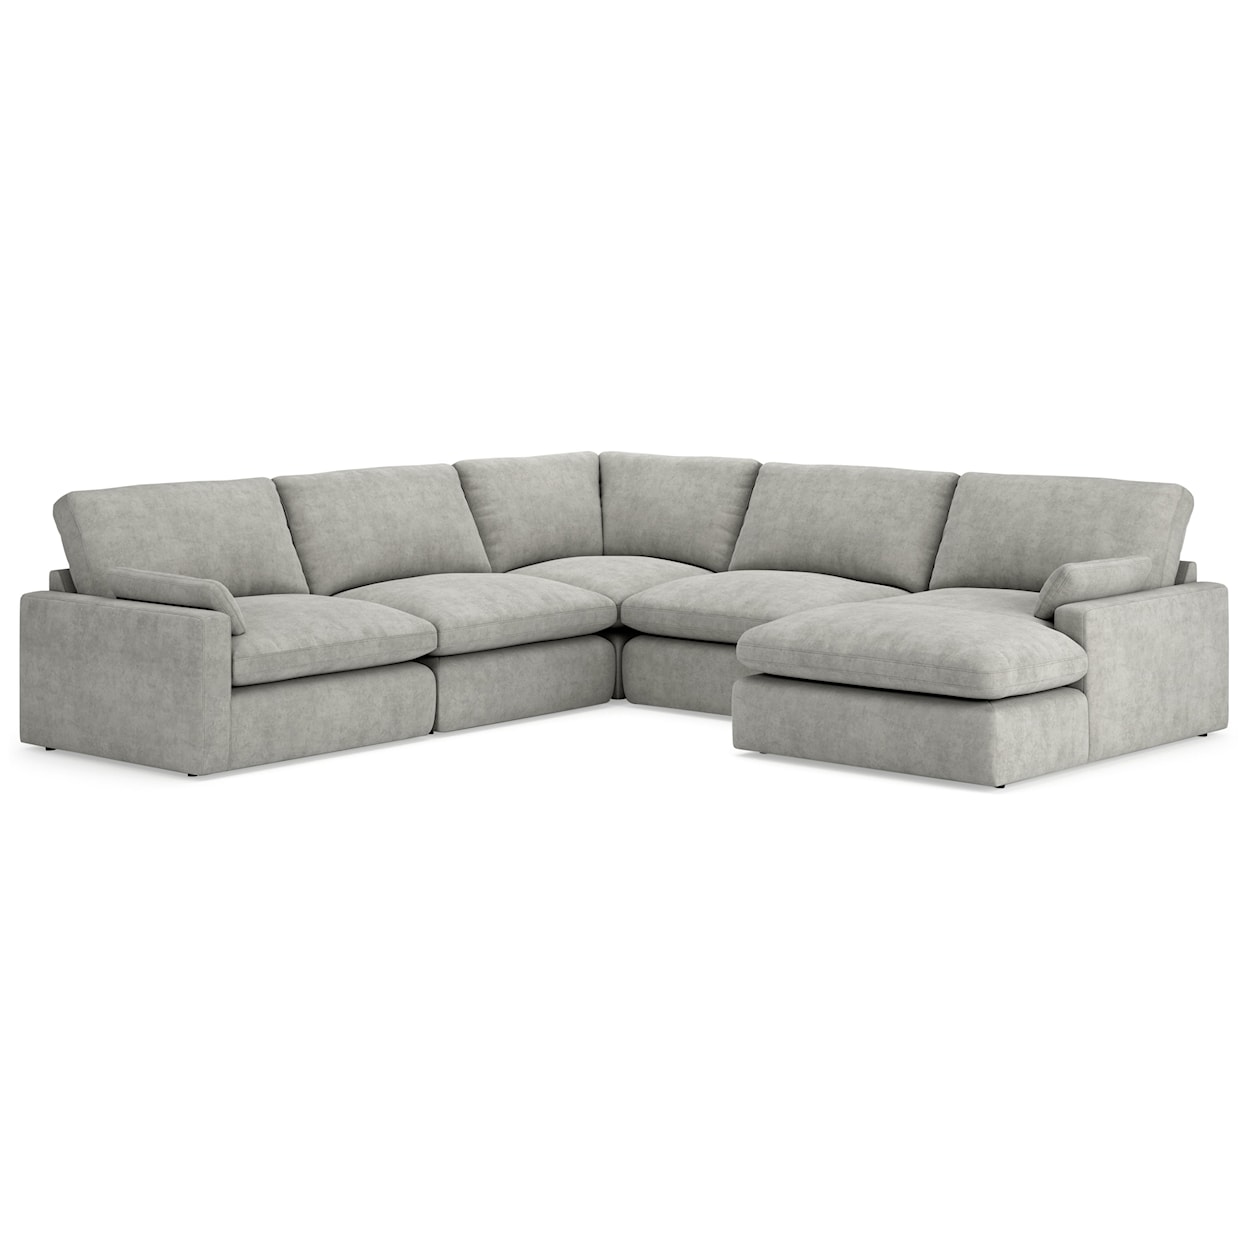 Signature Design by Ashley Sophie 5-Piece Sectional with Chaise